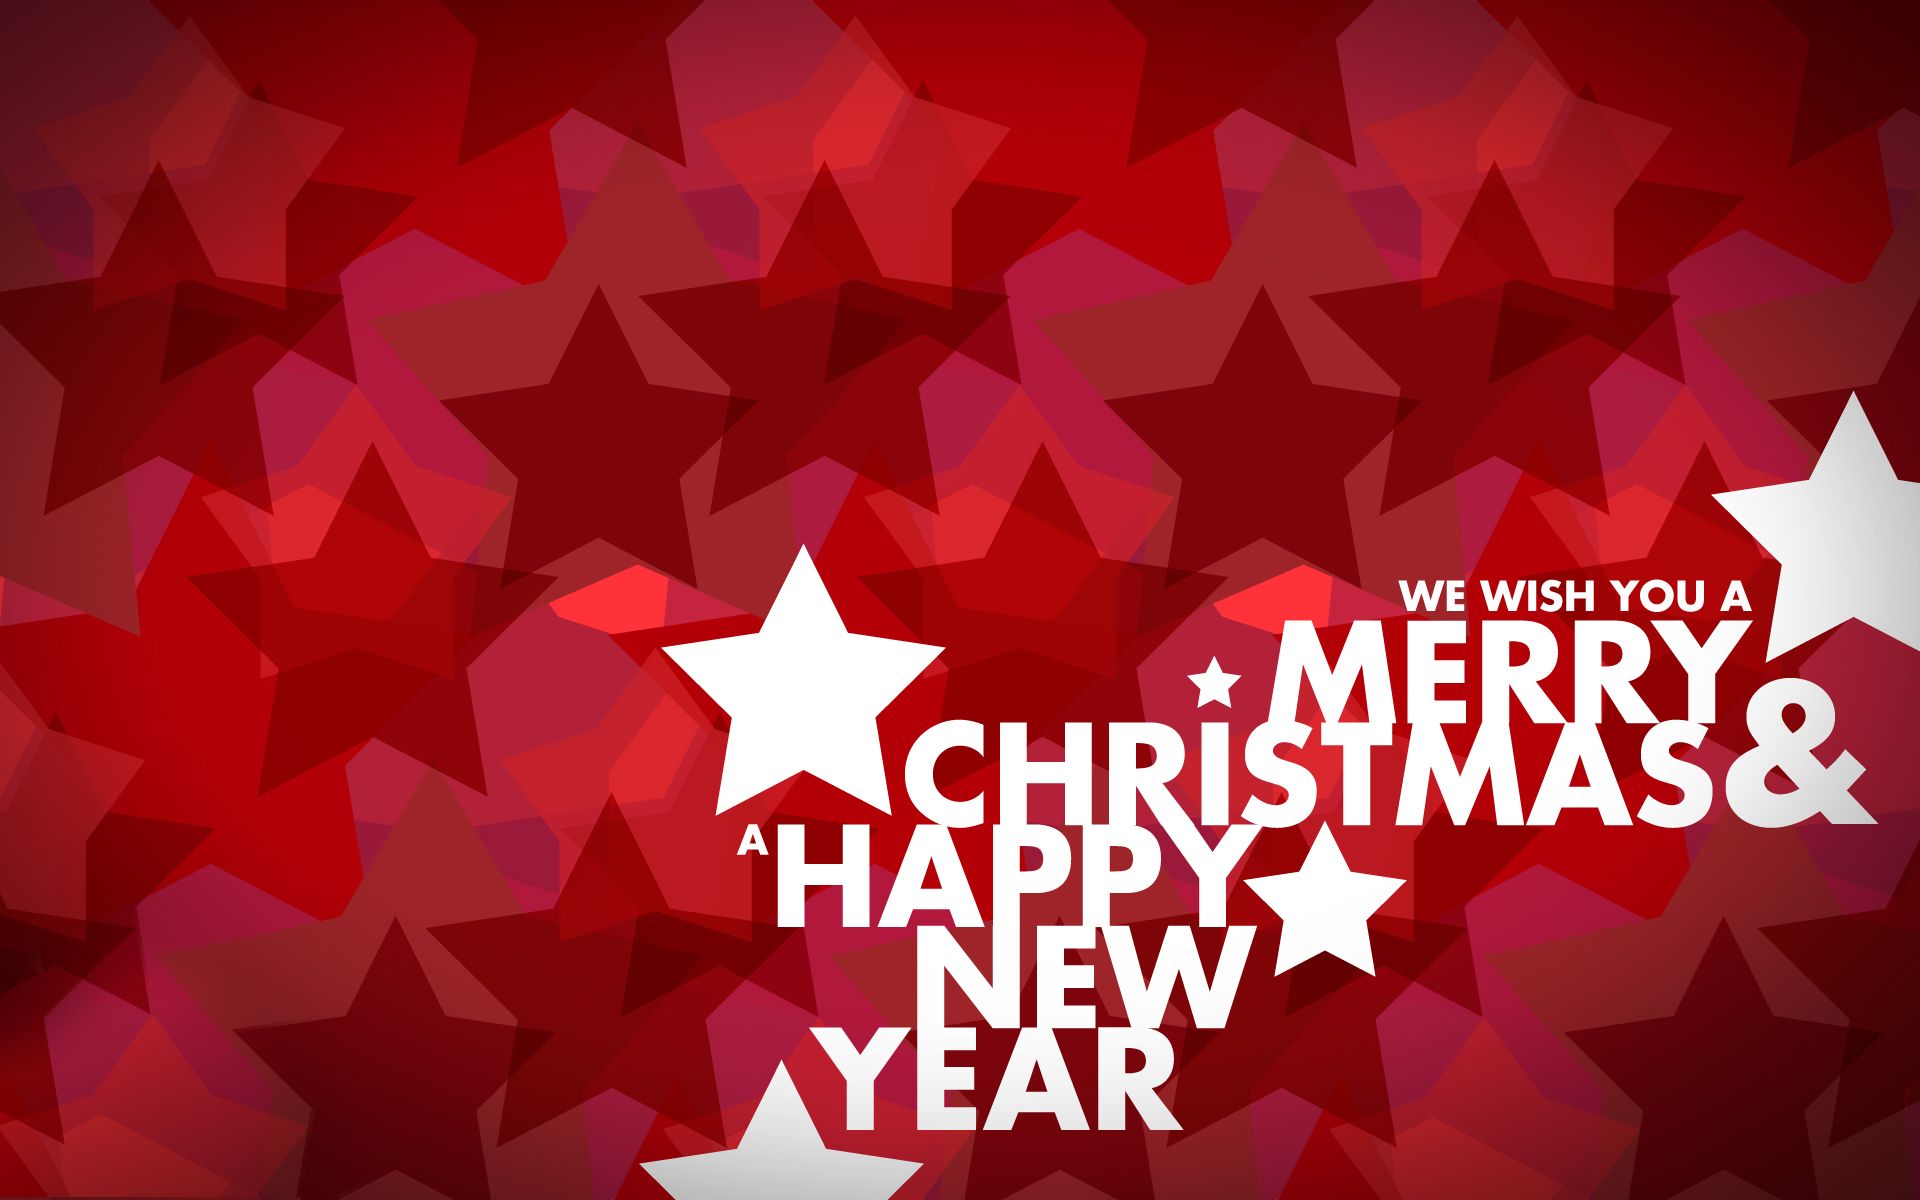 Merry Christmas And Happy New Year 2020 Wallpaper